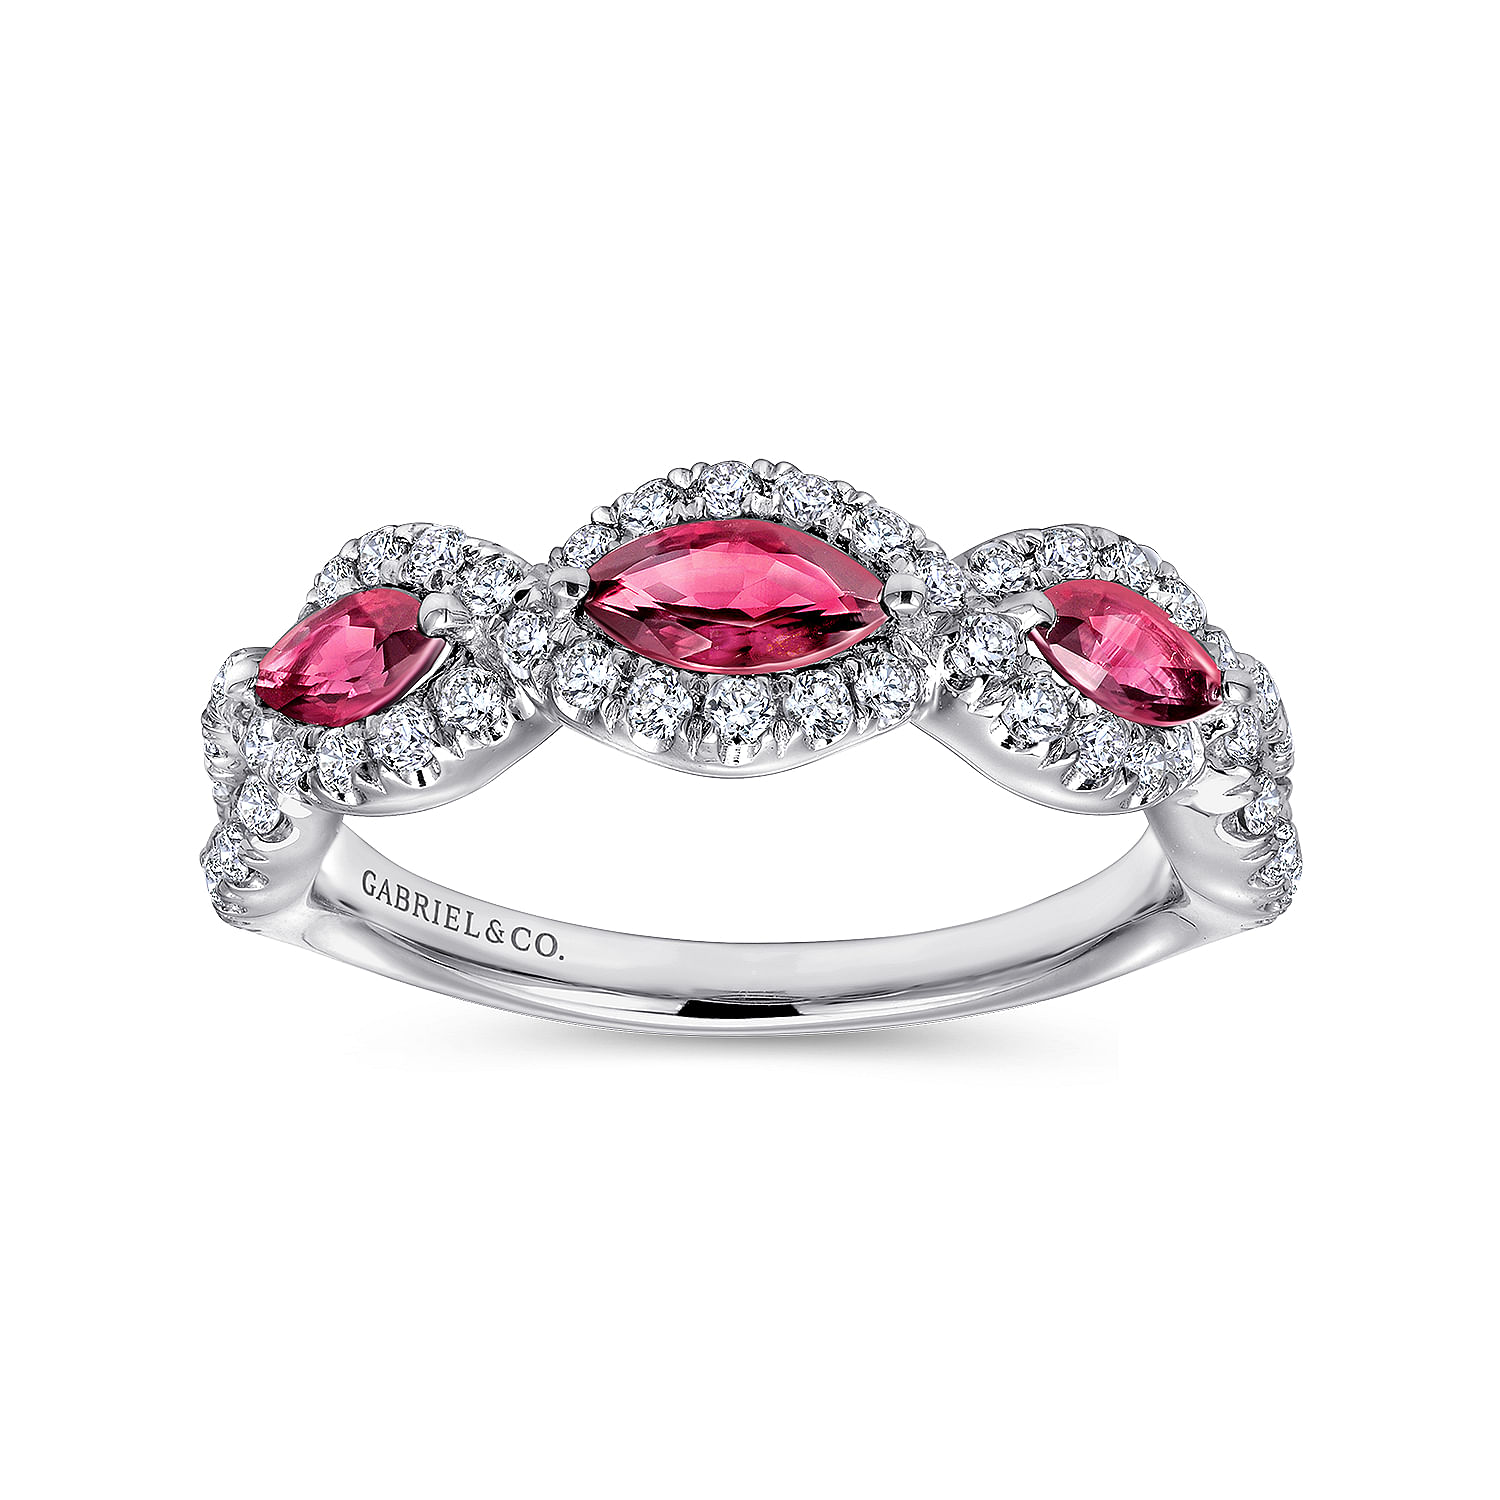 14K White Gold Twisted Diamond Rows and Ruby Marquise Stones Ring